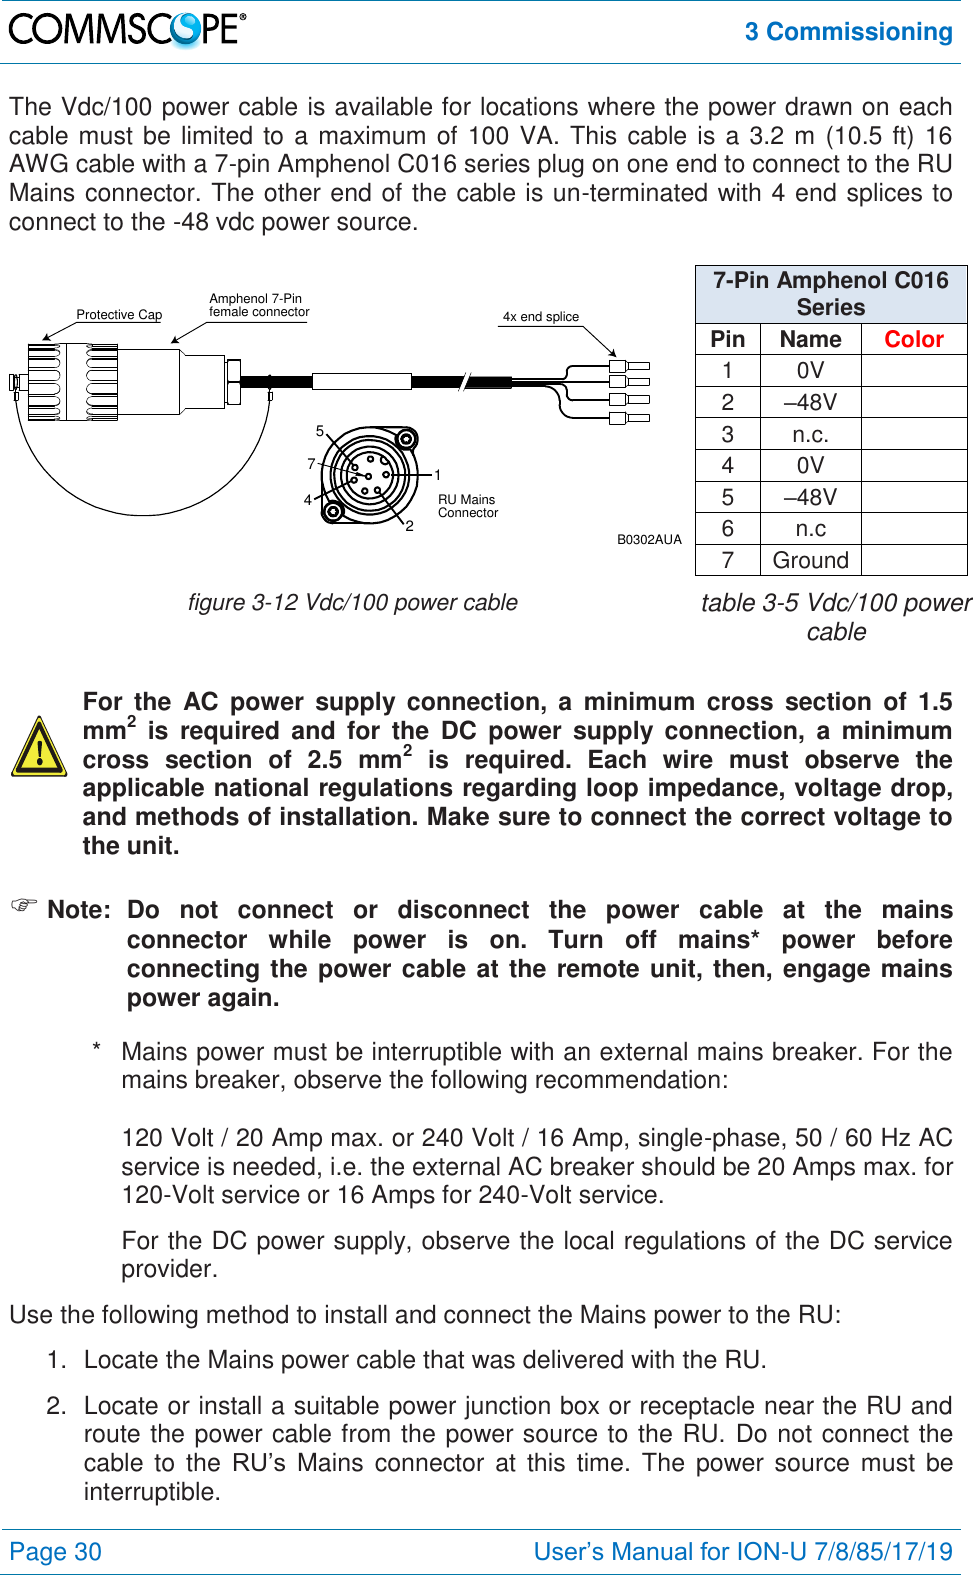  3 Commissioning  Page 30 User’s Manual for ION-U 7/8/85/17/19  The Vdc/100 power cable is available for locations where the power drawn on each cable must be limited to a maximum of 100 VA. This cable is a 3.2 m (10.5 ft) 16 AWG cable with a 7-pin Amphenol C016 series plug on one end to connect to the RU Mains connector. The other end of the cable is un-terminated with 4 end splices to connect to the -48 vdc power source.   12457Amphenol 7-Pinfemale connectorProtective Cap 4x end spliceB0302AUARU MainsConnector 7-Pin Amphenol C016 Series Pin Name Color 1 0V  2 –48V  3 n.c.  4 0V  5 –48V  6 n.c  7 Ground   figure 3-12 Vdc/100 power cable table 3-5 Vdc/100 power cable    For  the  AC  power  supply  connection,  a  minimum  cross  section of  1.5 mm2  is  required  and for  the  DC  power  supply  connection,  a  minimum cross  section  of  2.5  mm2  is  required.  Each  wire  must  observe  the applicable national regulations regarding loop impedance, voltage drop, and methods of installation. Make sure to connect the correct voltage to the unit.   Note:  Do  not  connect  or  disconnect  the  power  cable  at  the  mains connector  while  power  is  on.  Turn  off  mains*  power  before connecting the power cable at the remote unit, then, engage mains power again. *   Mains power must be interruptible with an external mains breaker. For the mains breaker, observe the following recommendation:  120 Volt / 20 Amp max. or 240 Volt / 16 Amp, single-phase, 50 / 60 Hz AC service is needed, i.e. the external AC breaker should be 20 Amps max. for 120-Volt service or 16 Amps for 240-Volt service. For the DC power supply, observe the local regulations of the DC service provider. Use the following method to install and connect the Mains power to the RU: 1.  Locate the Mains power cable that was delivered with the RU. 2.  Locate or install a suitable power junction box or receptacle near the RU and route the power cable from the power source to the RU. Do not connect the cable  to  the  RU’s  Mains  connector  at  this  time.  The power  source  must be interruptible. 